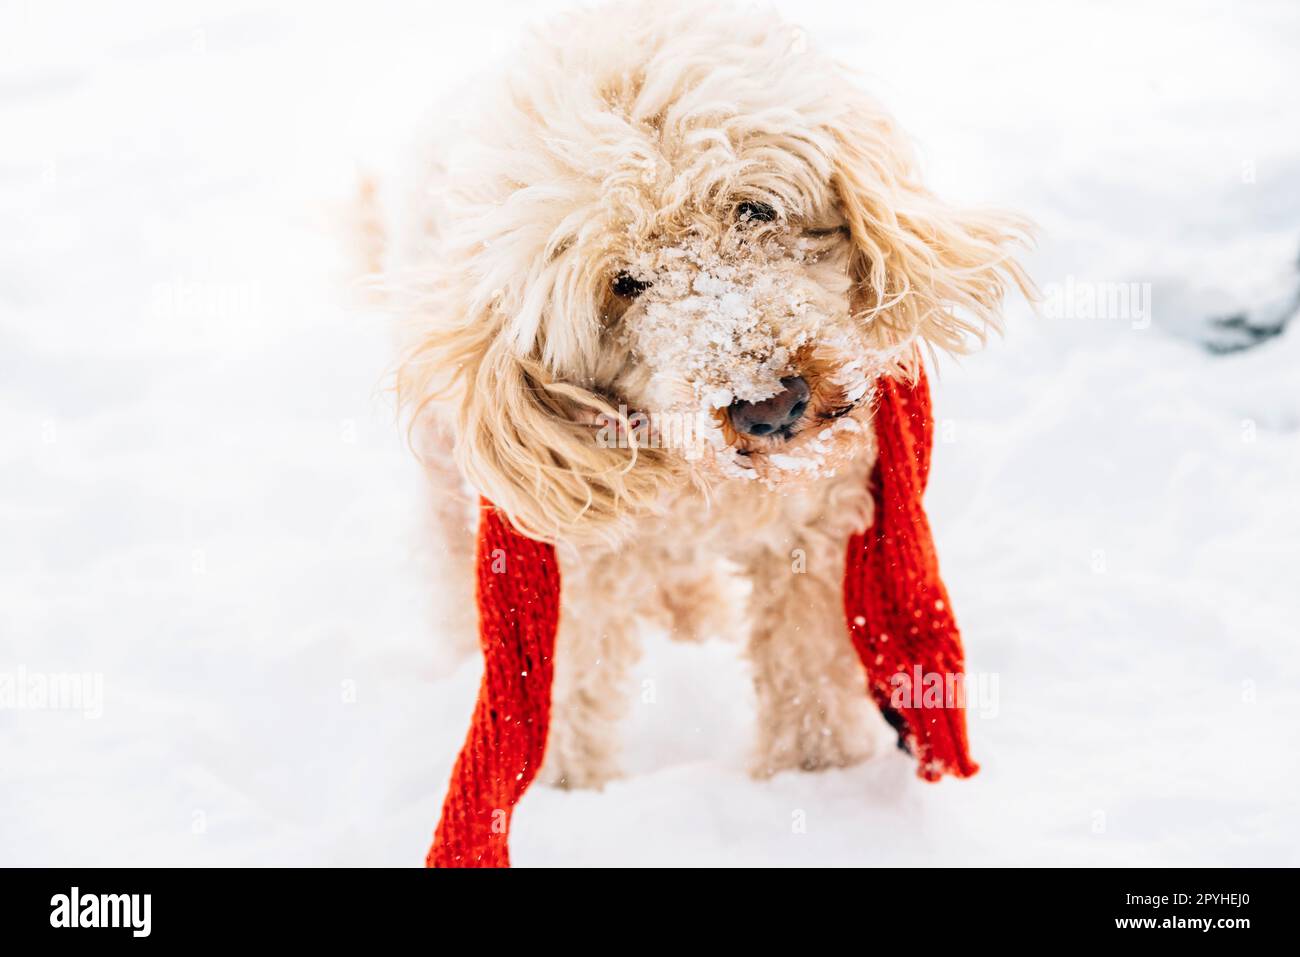 Cute and funny little dog with red scarf playing and jumping in the snow. Stock Photo